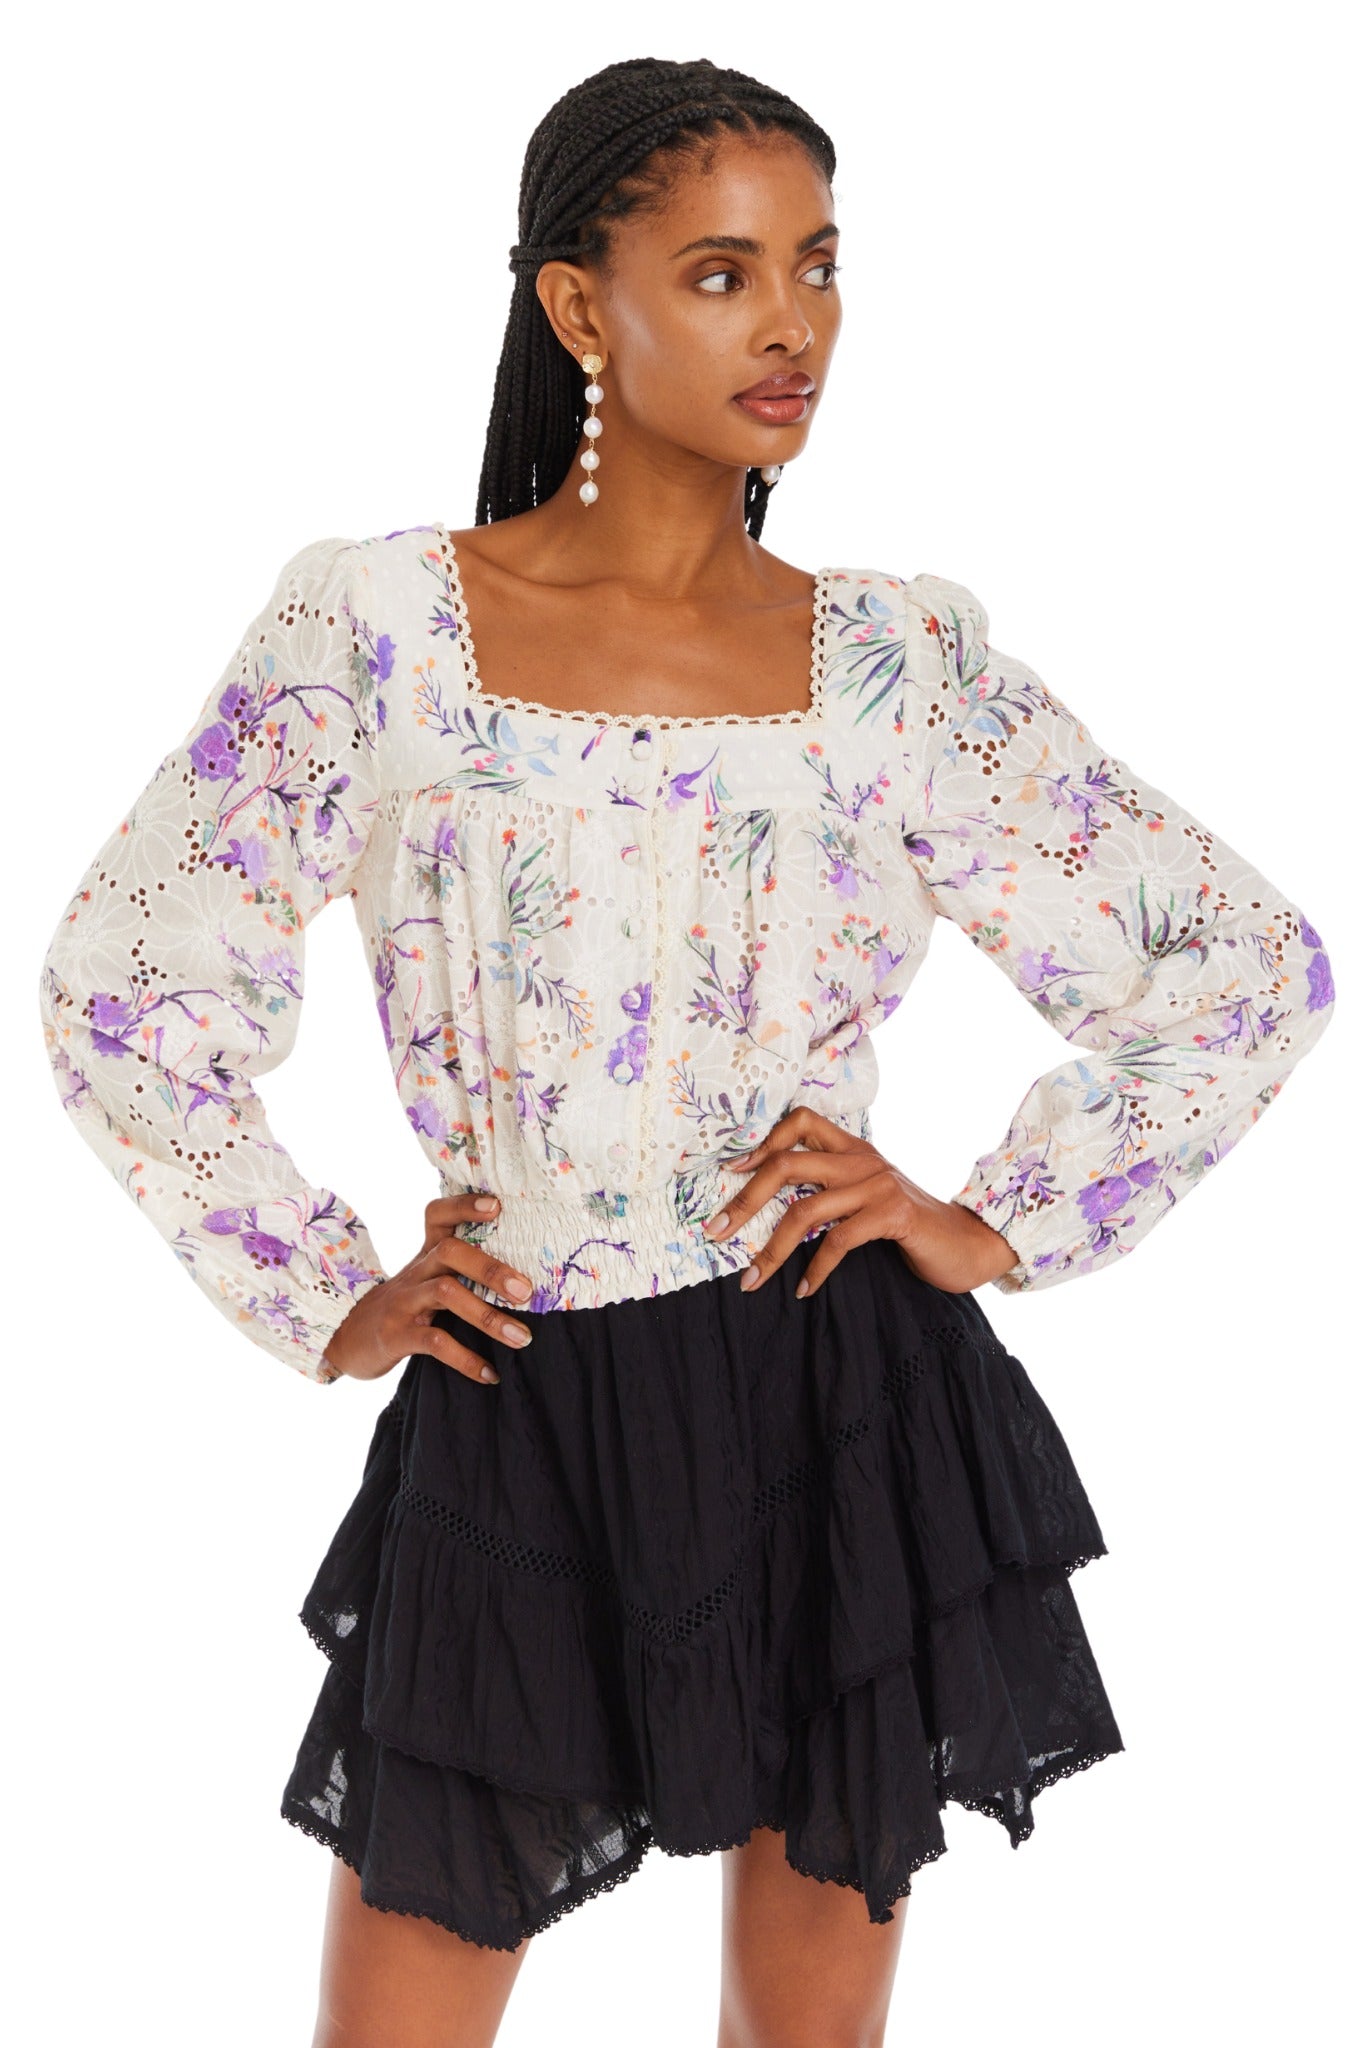 Allison NY Rylie Top Watercolor Floral